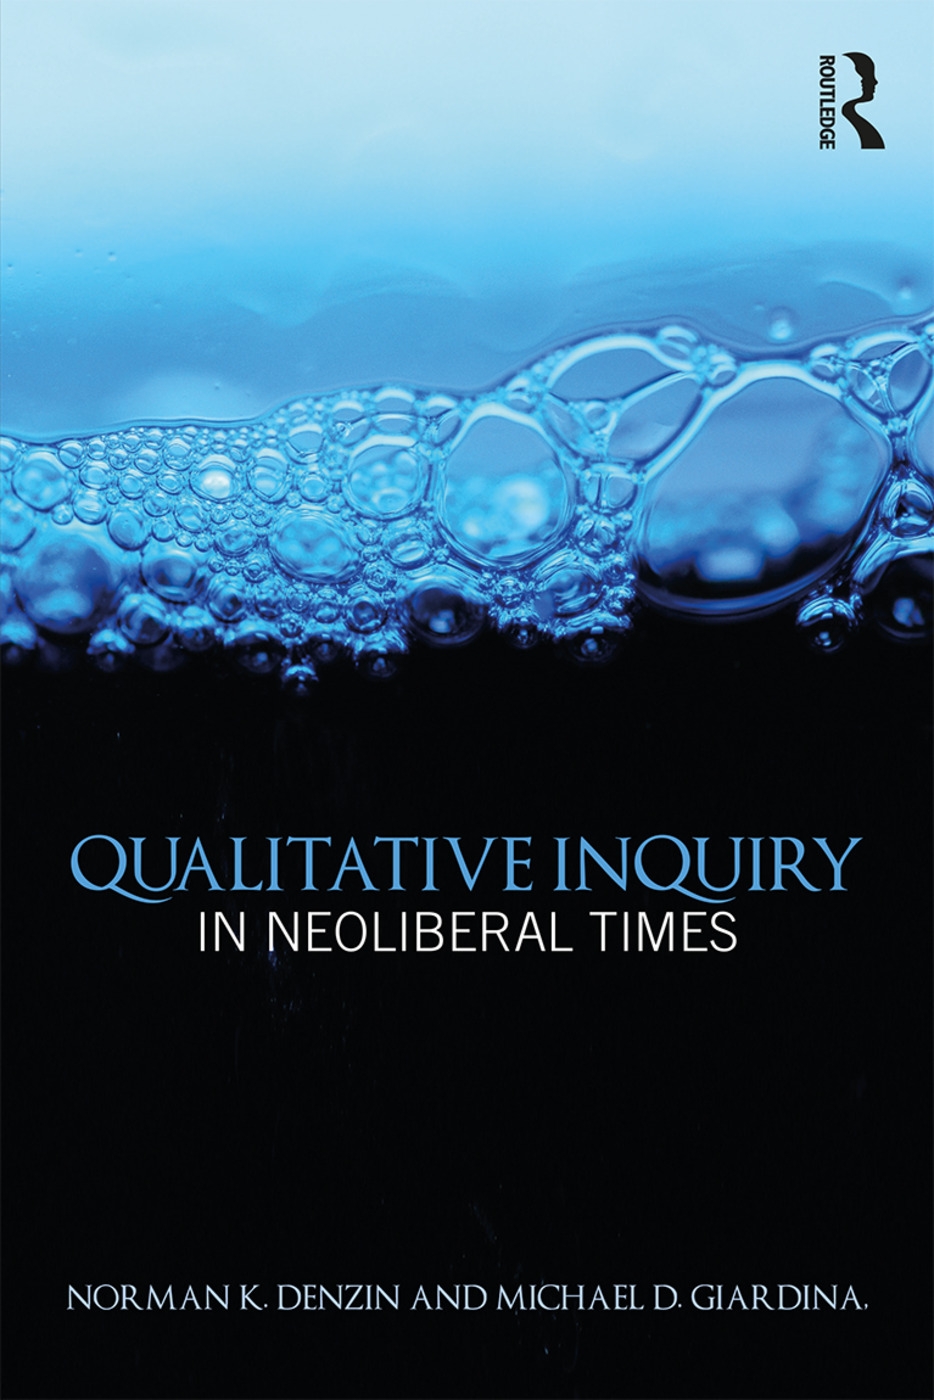 Qualitative Inquiry in Neoliberal Times